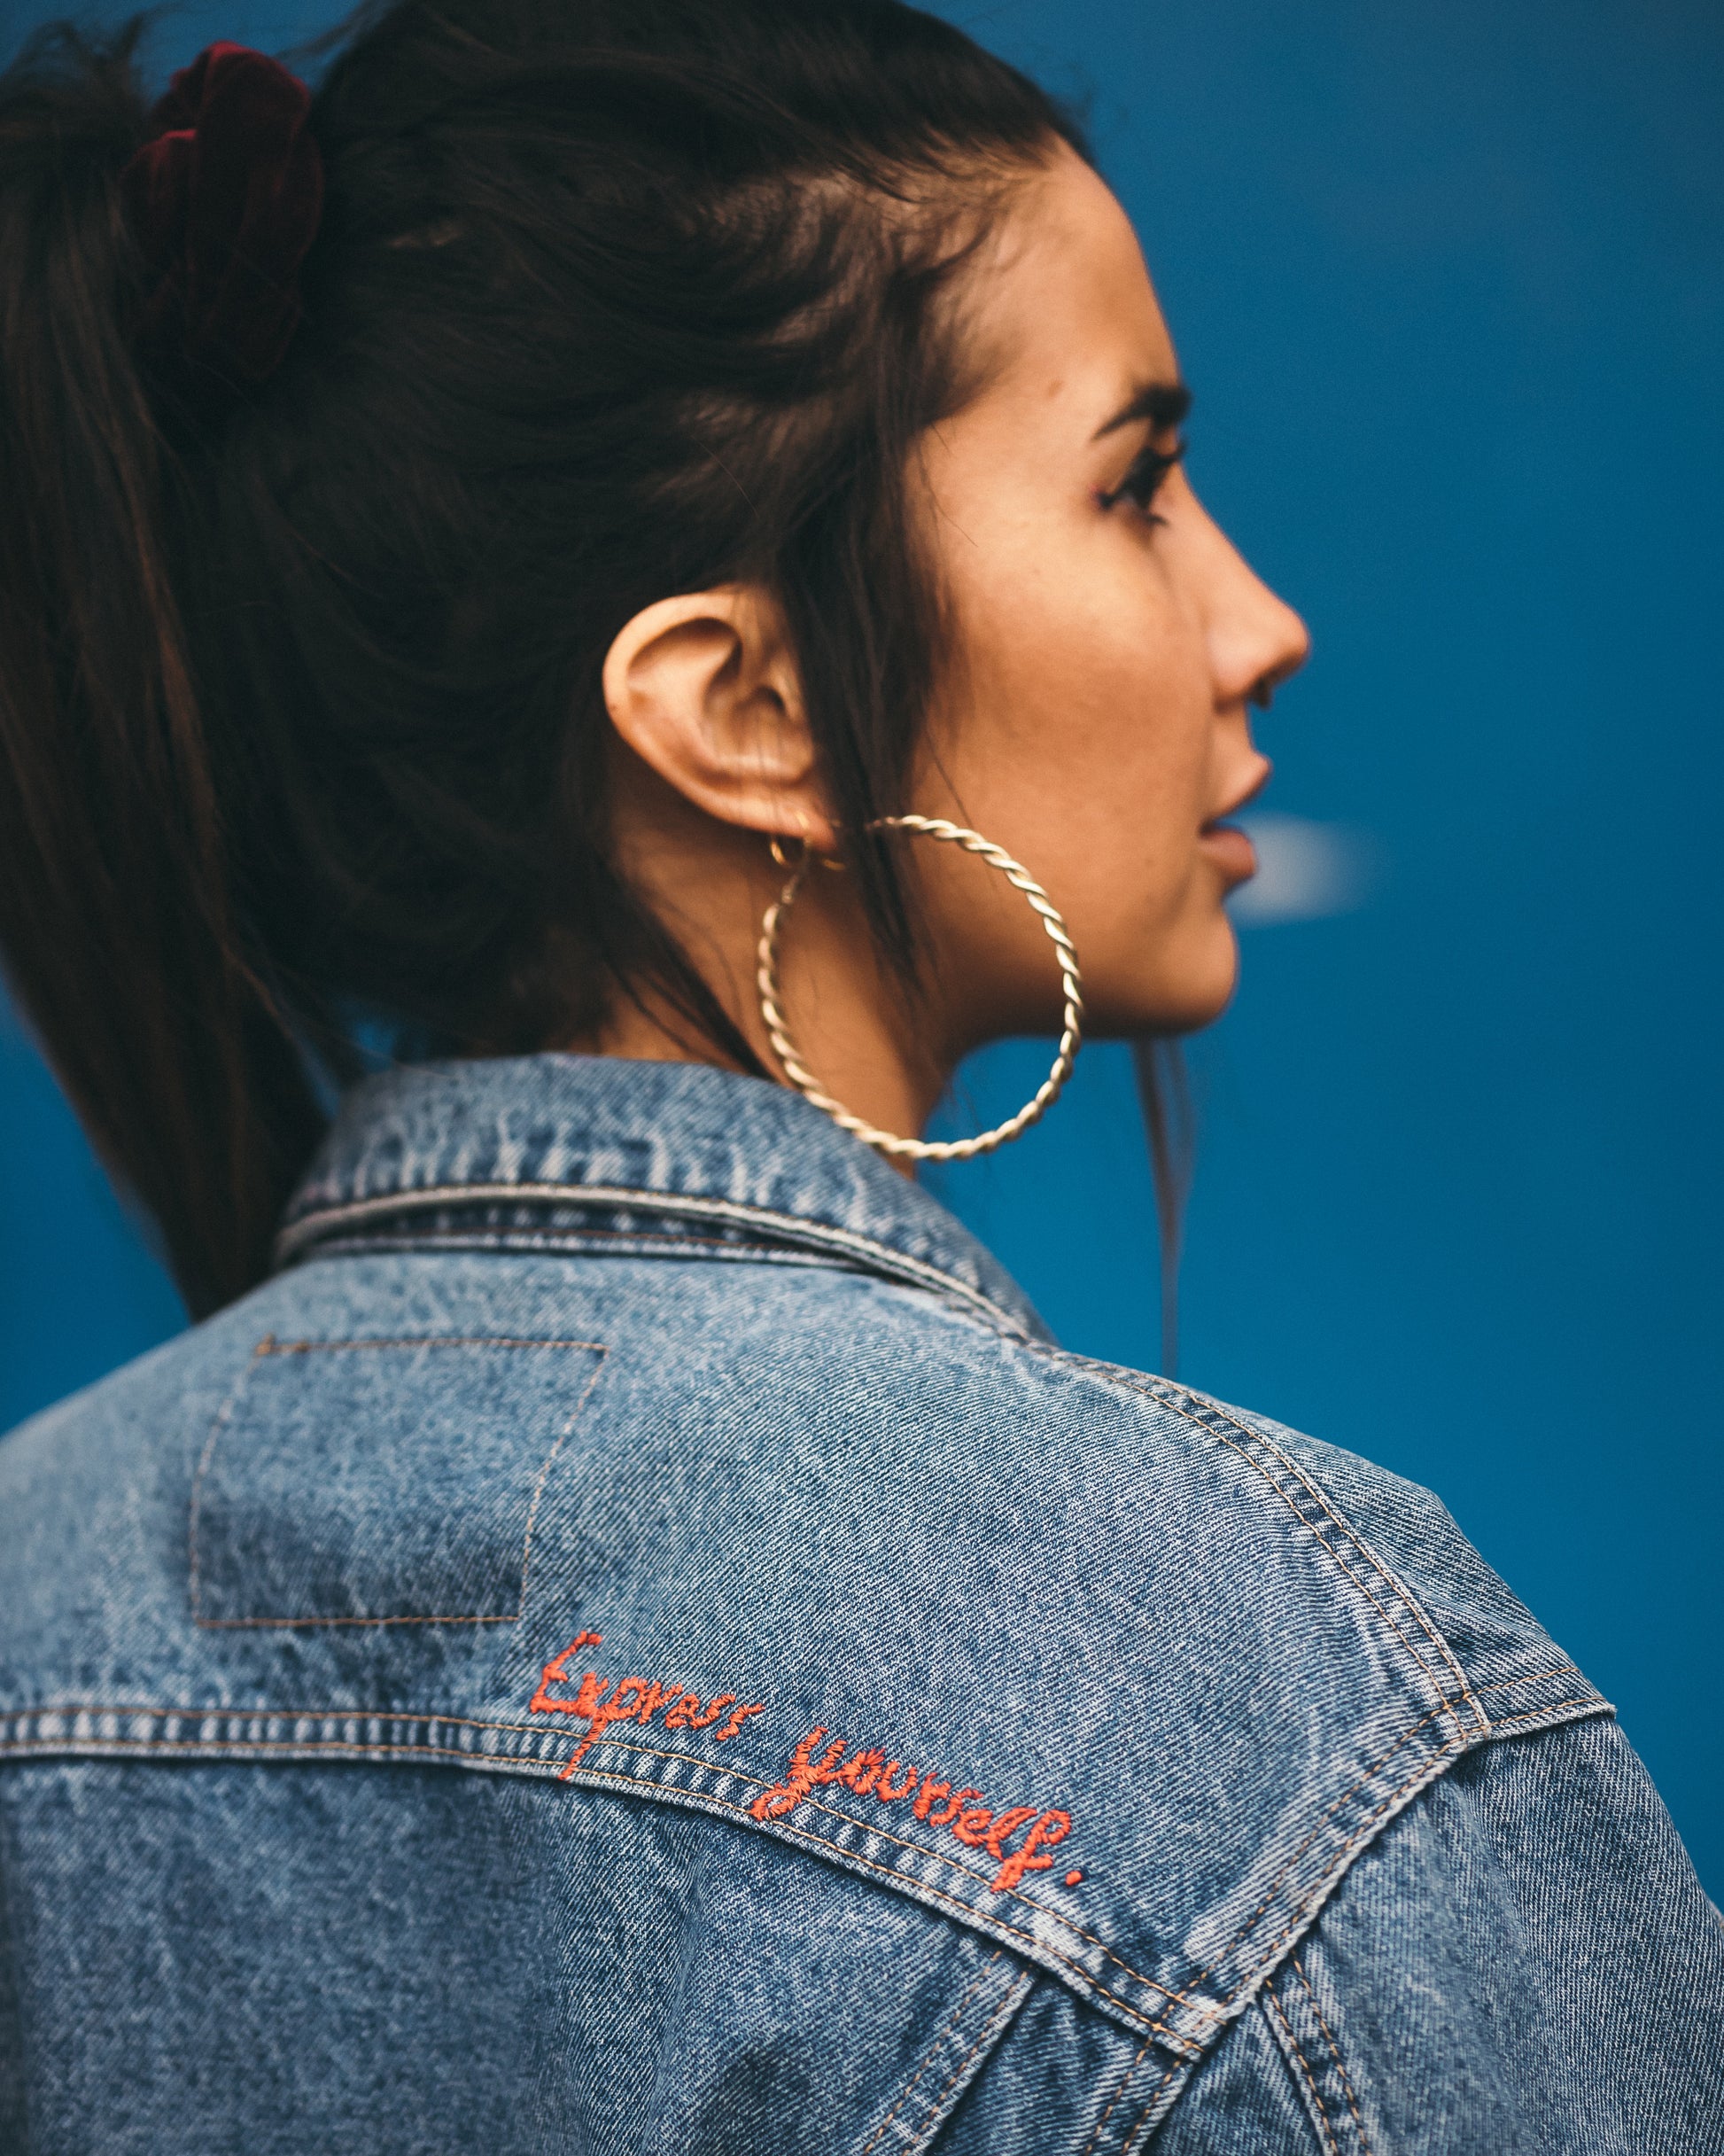 Young-woman-wearing-jeans-jacket-with-embroidery-express-yourself